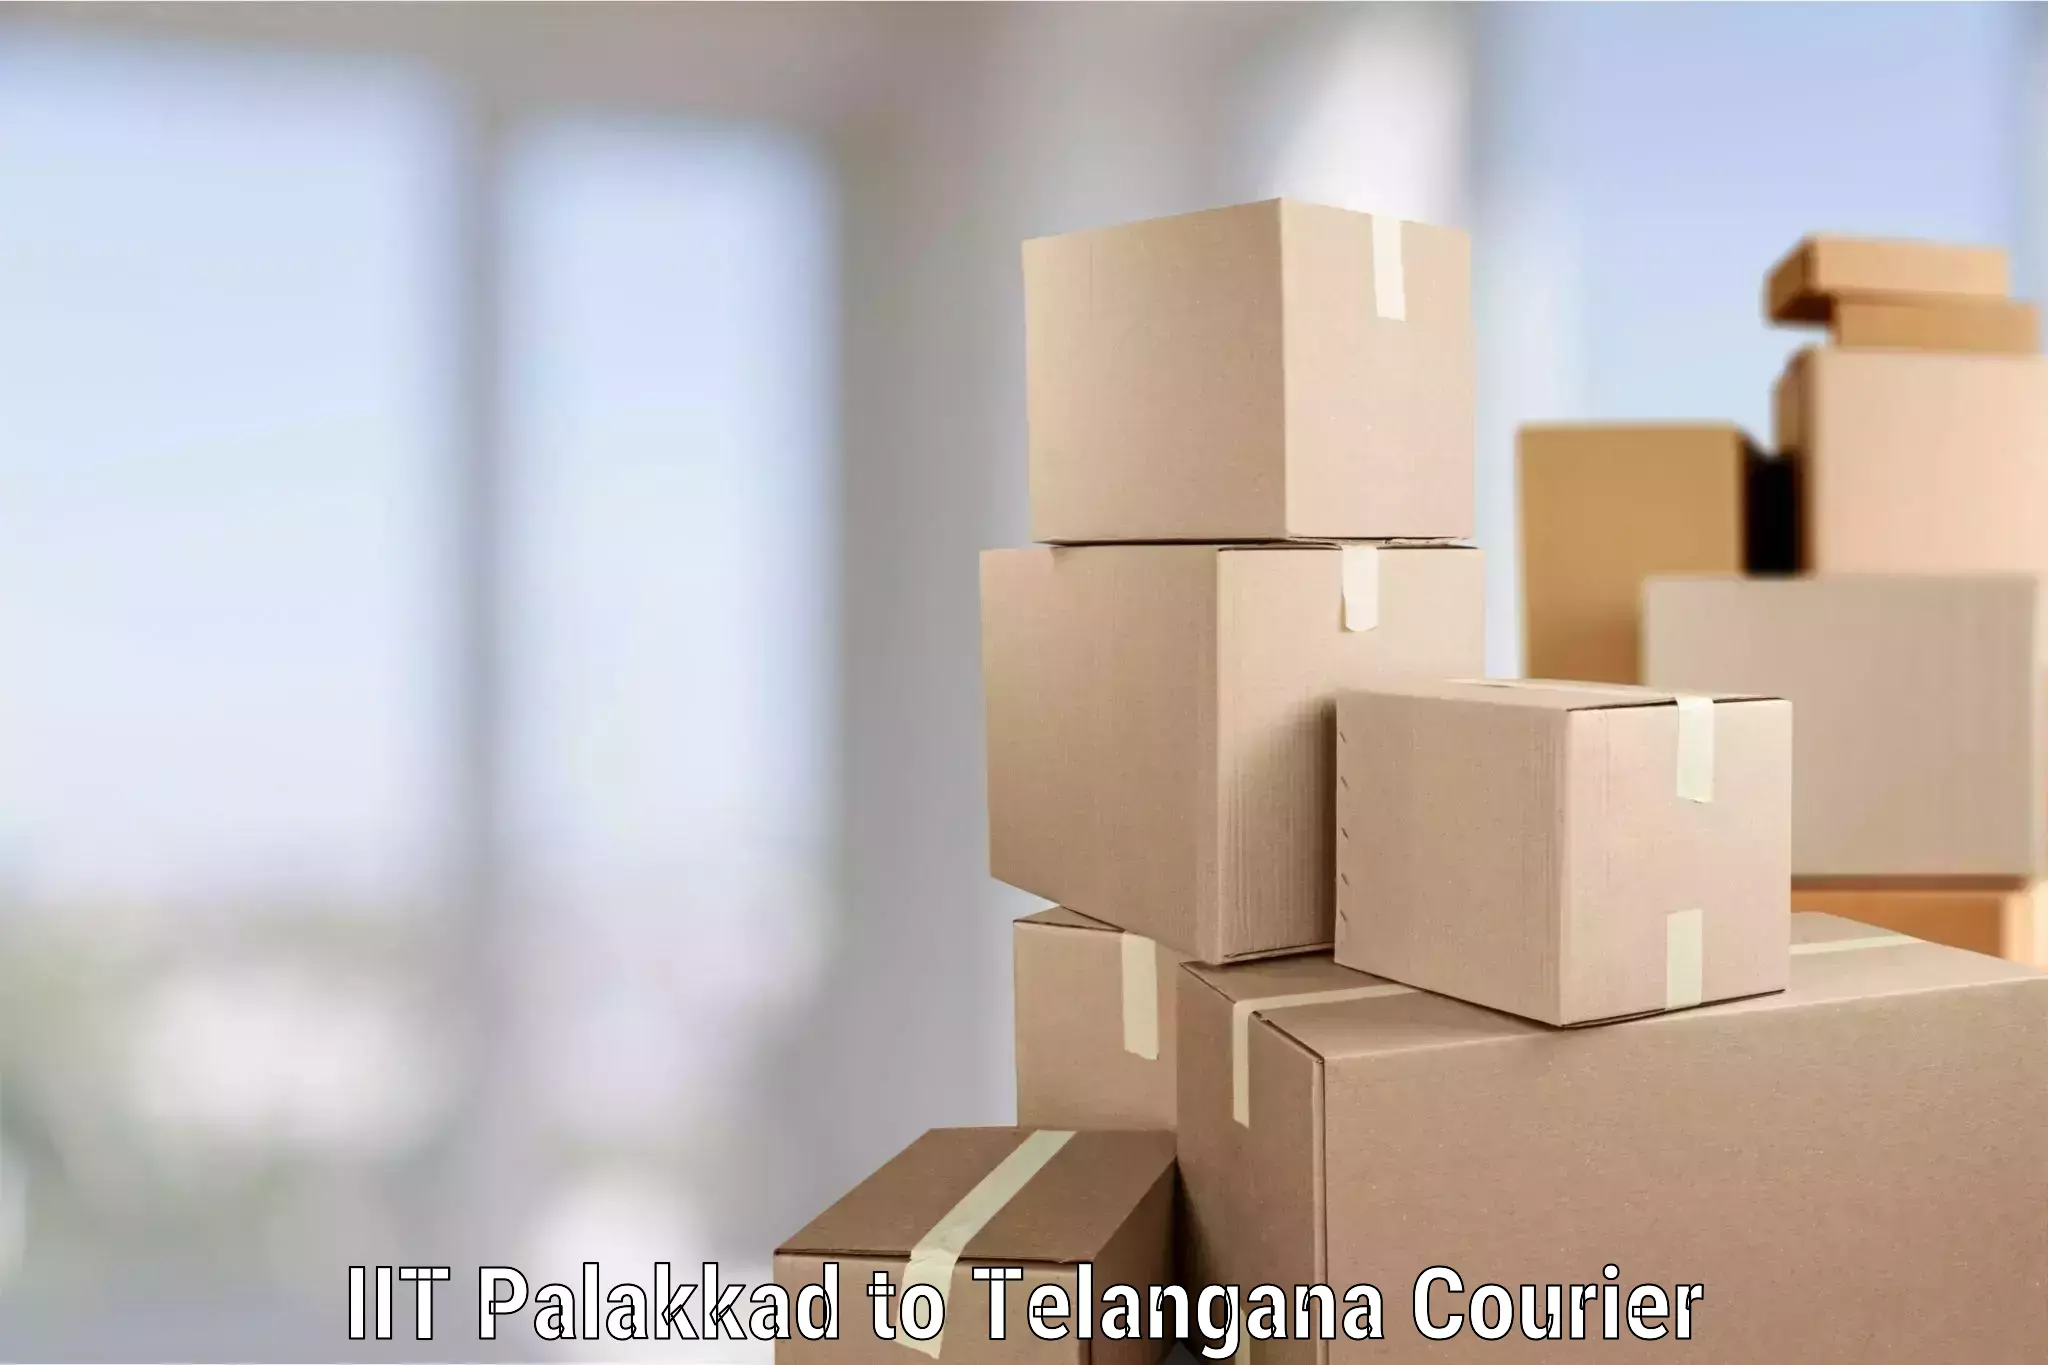 Professional moving company in IIT Palakkad to Bejjanki